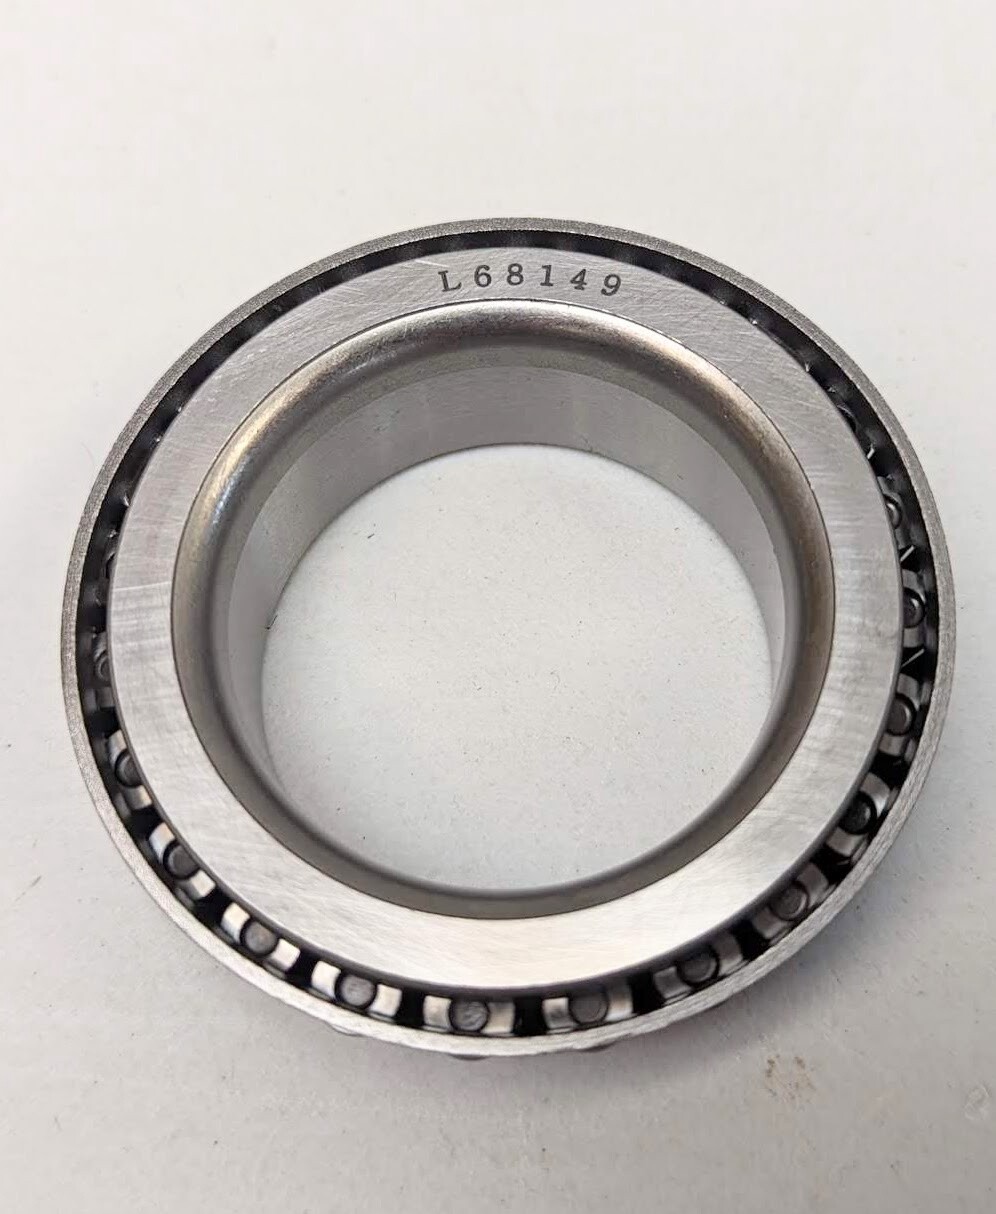 L68149 Replacement Inner Bearing